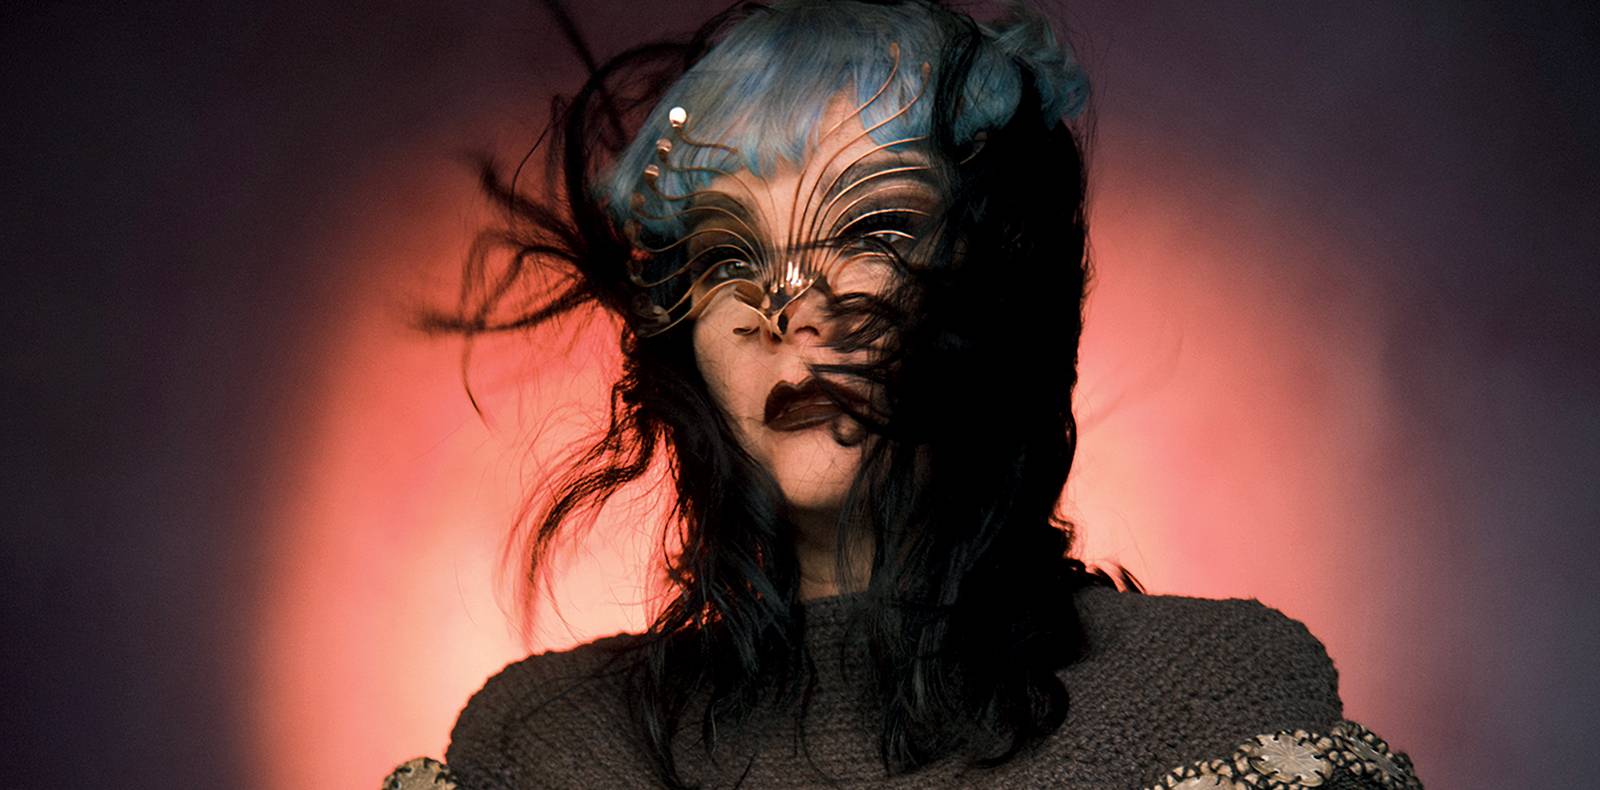 Interview with Björk : “ I see a lot of hope in mushrooms!”